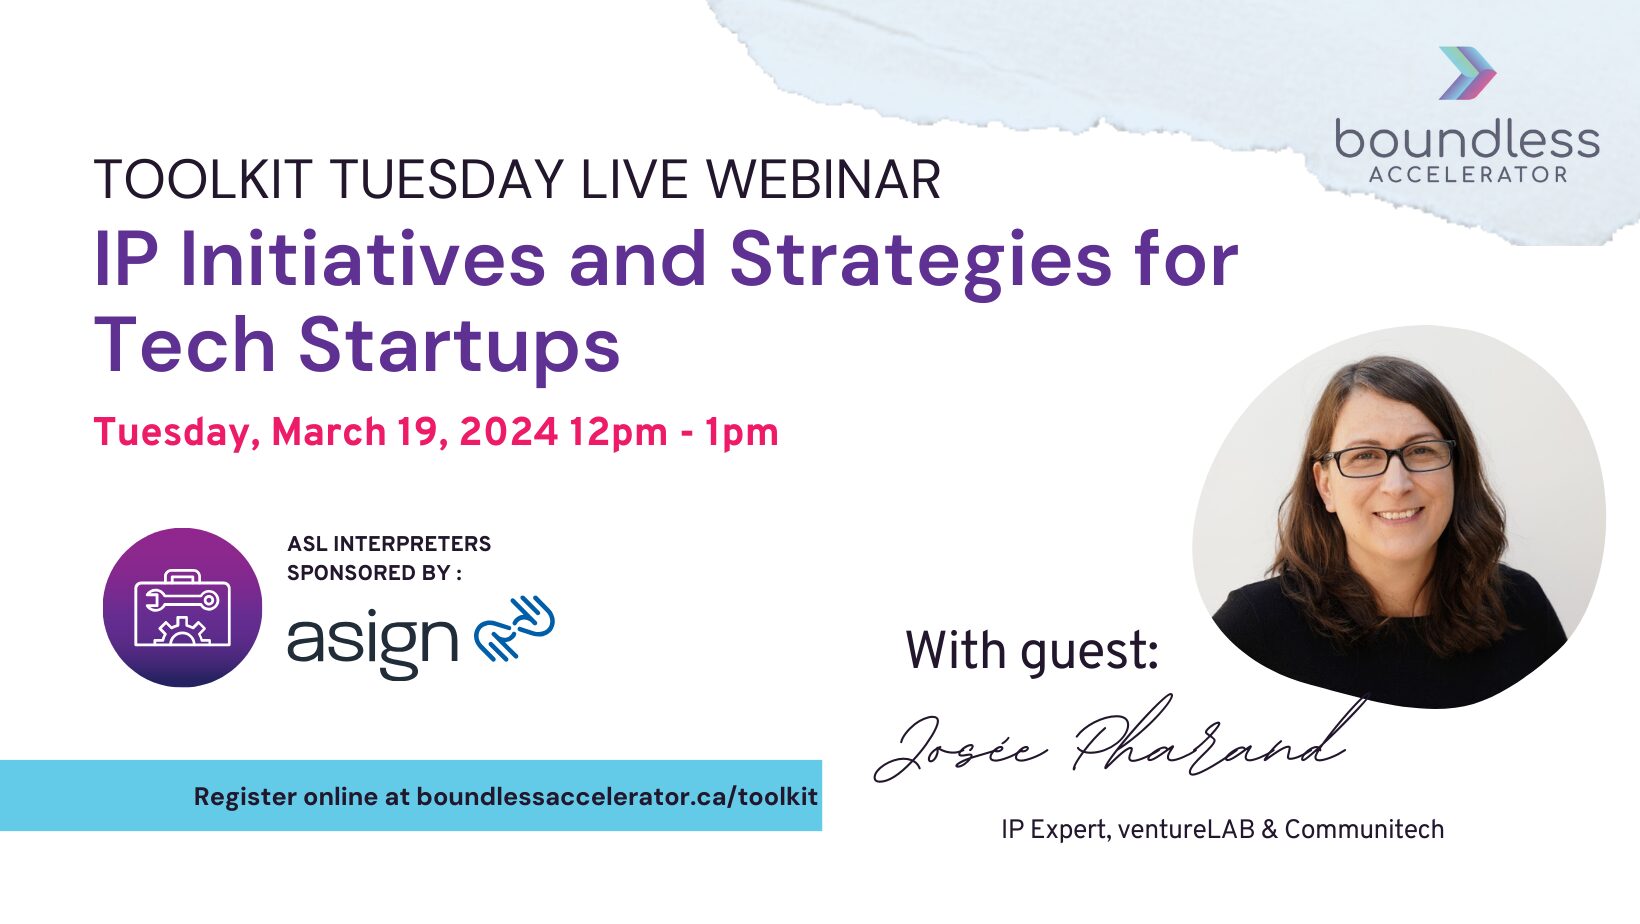 Toolkit Tuesday Live Webinar — IP Initiatives and Strategies for Tech Startups